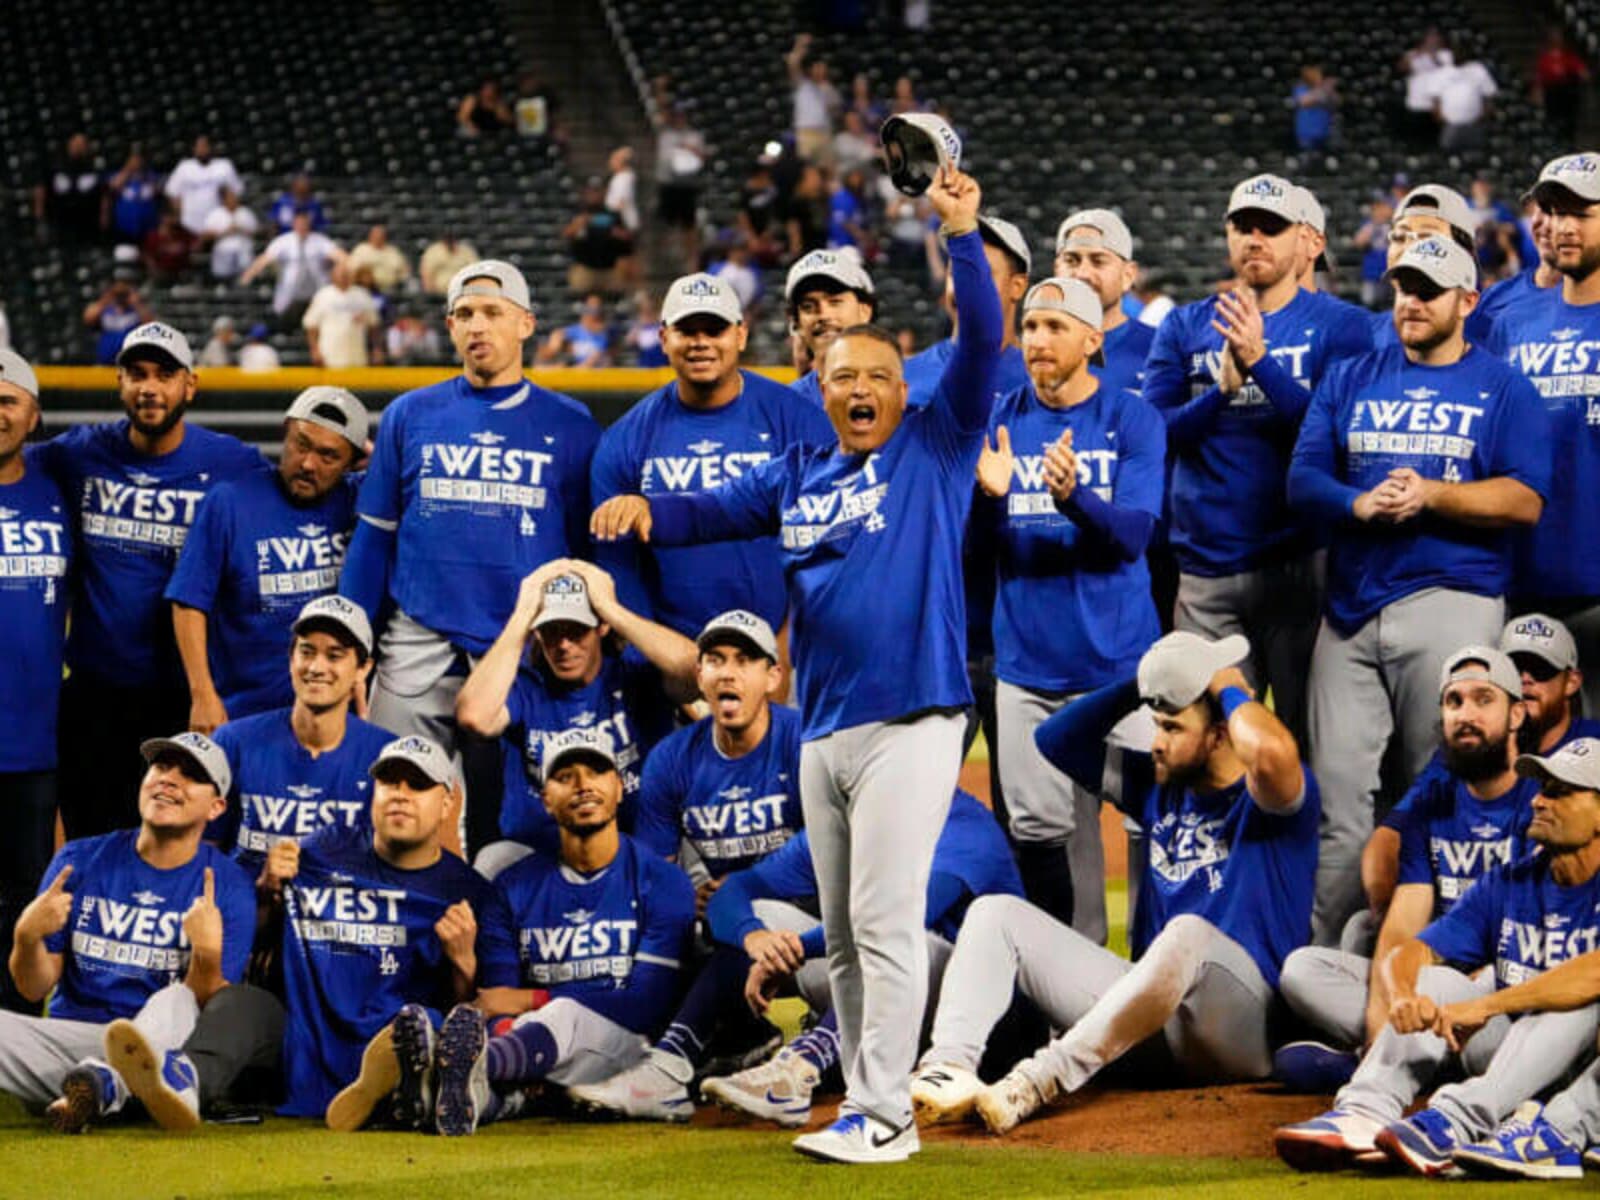 Dodgers finish with 111 wins, best in NL since 1906 Cubs